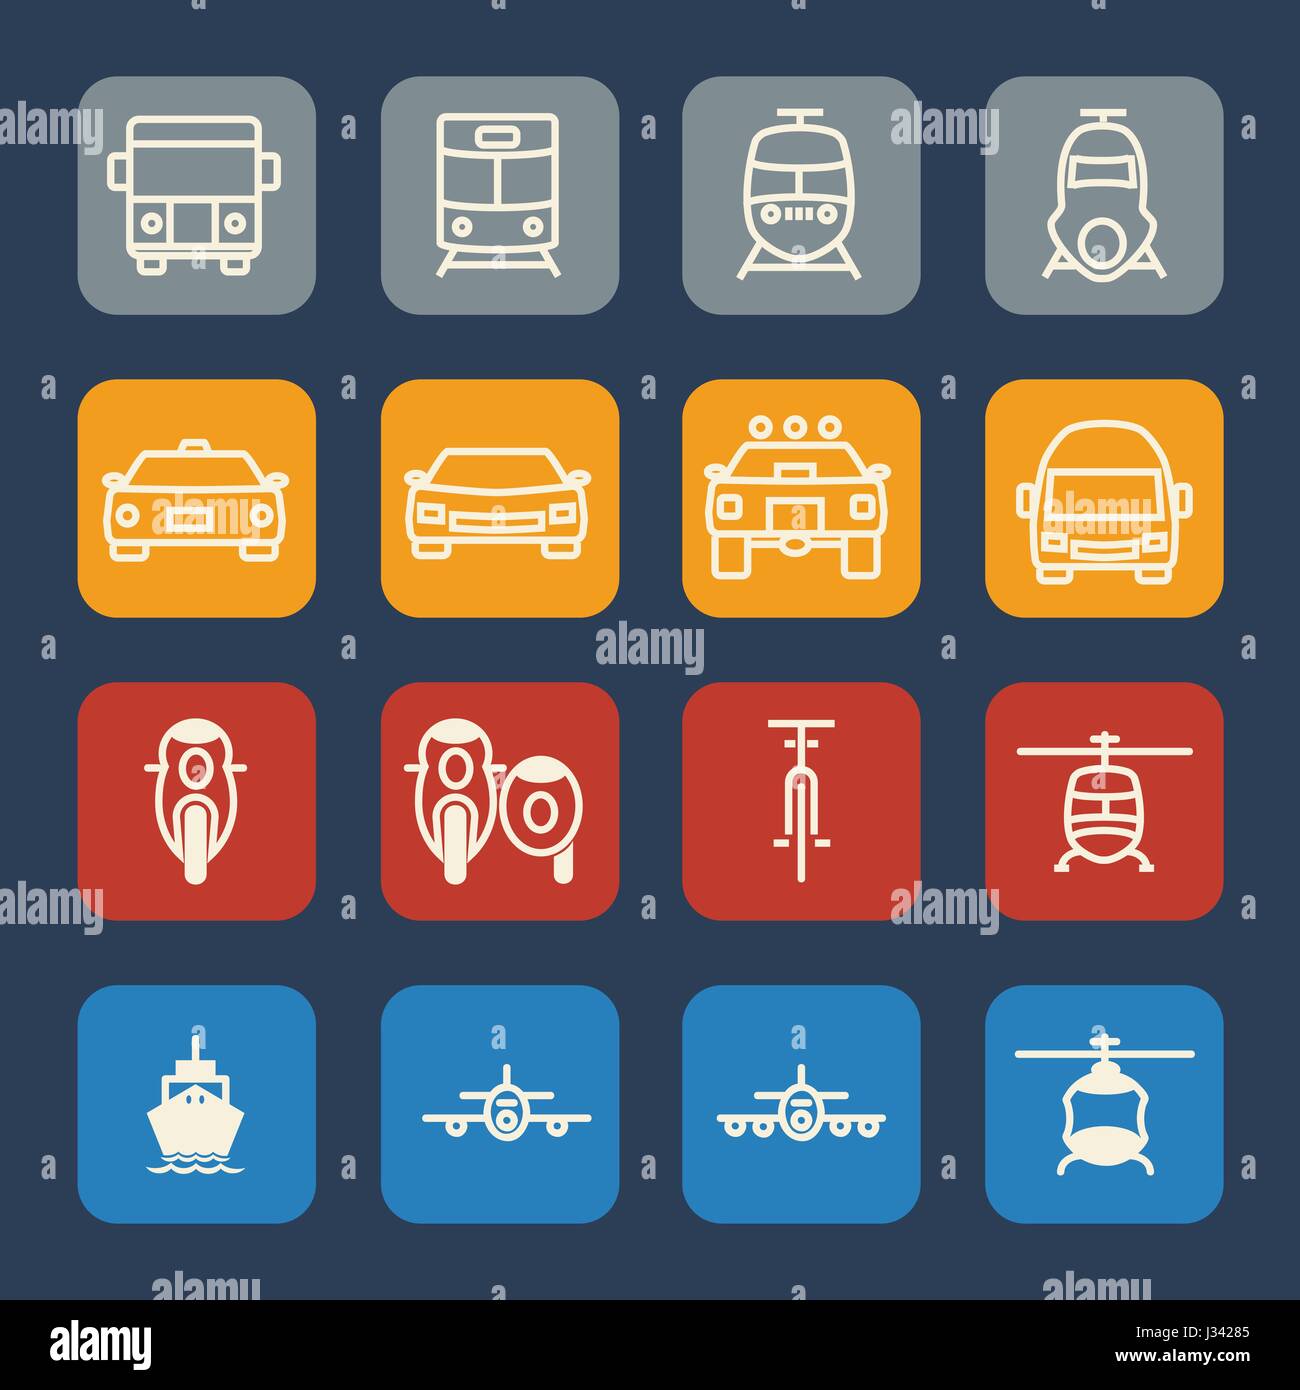 Vehicle and transportation icons set. Flat design. Stock Vector